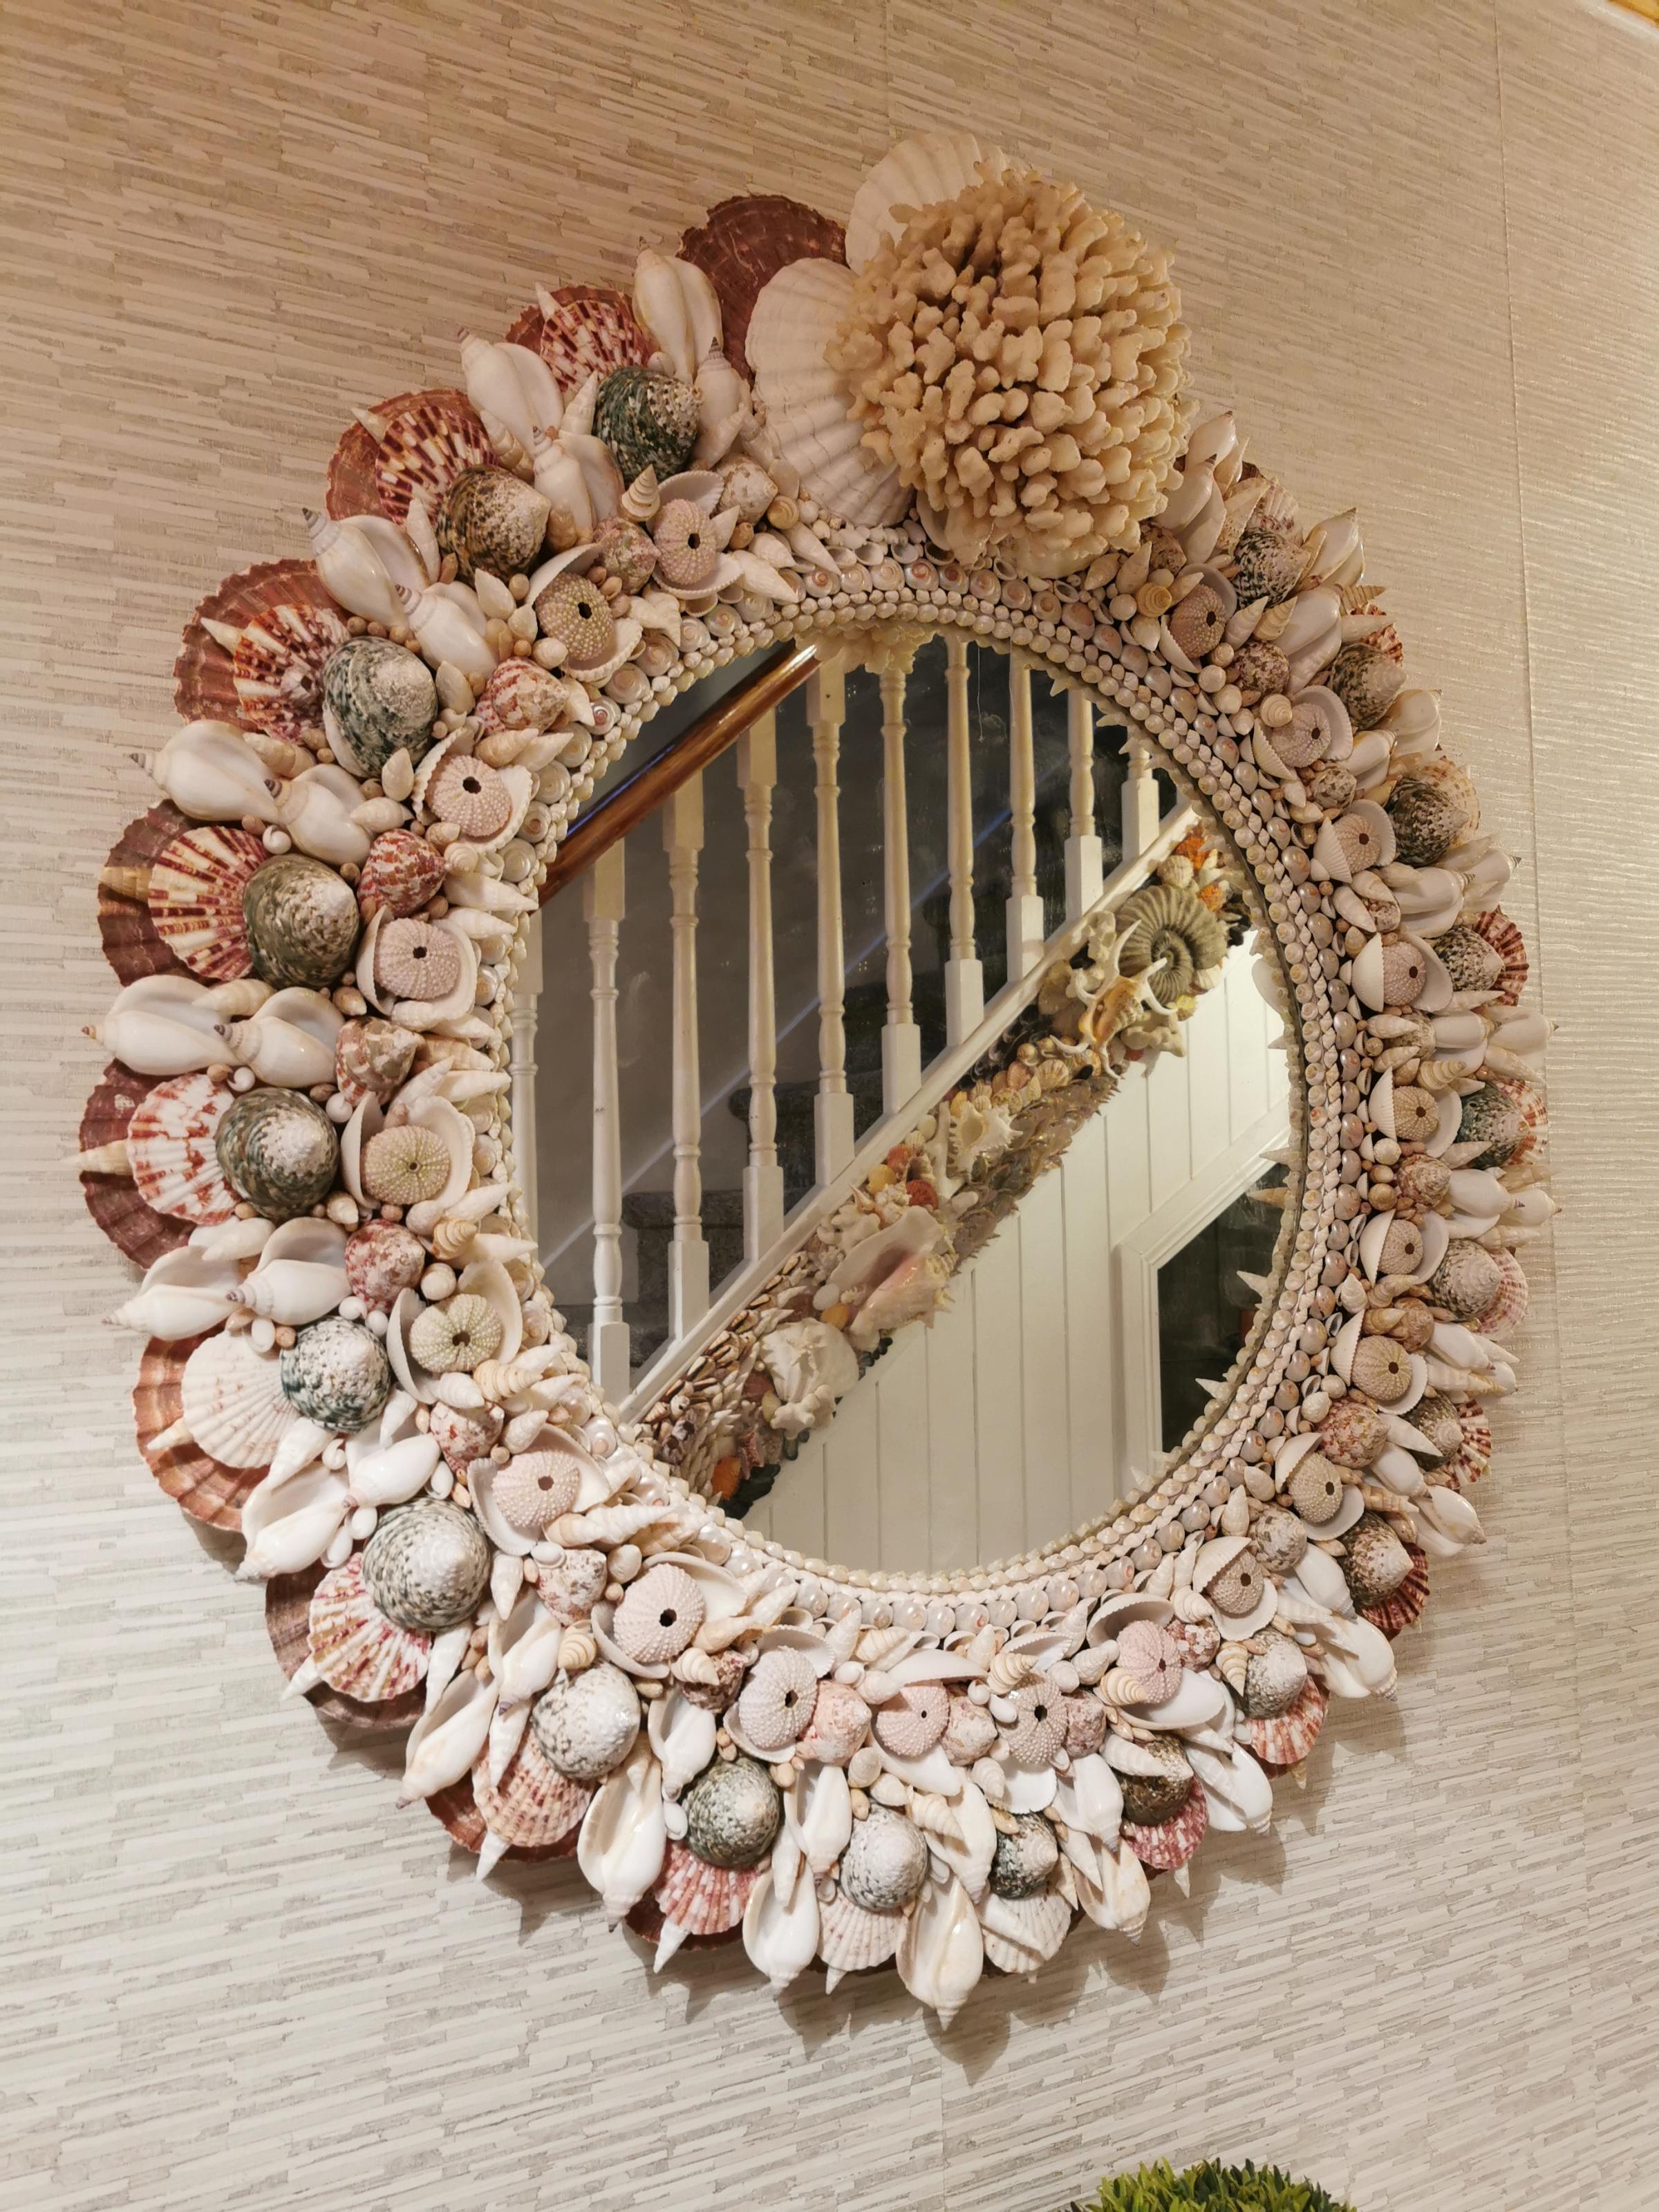 Coastal creations giant coral mirror with shell staircase in reflection.